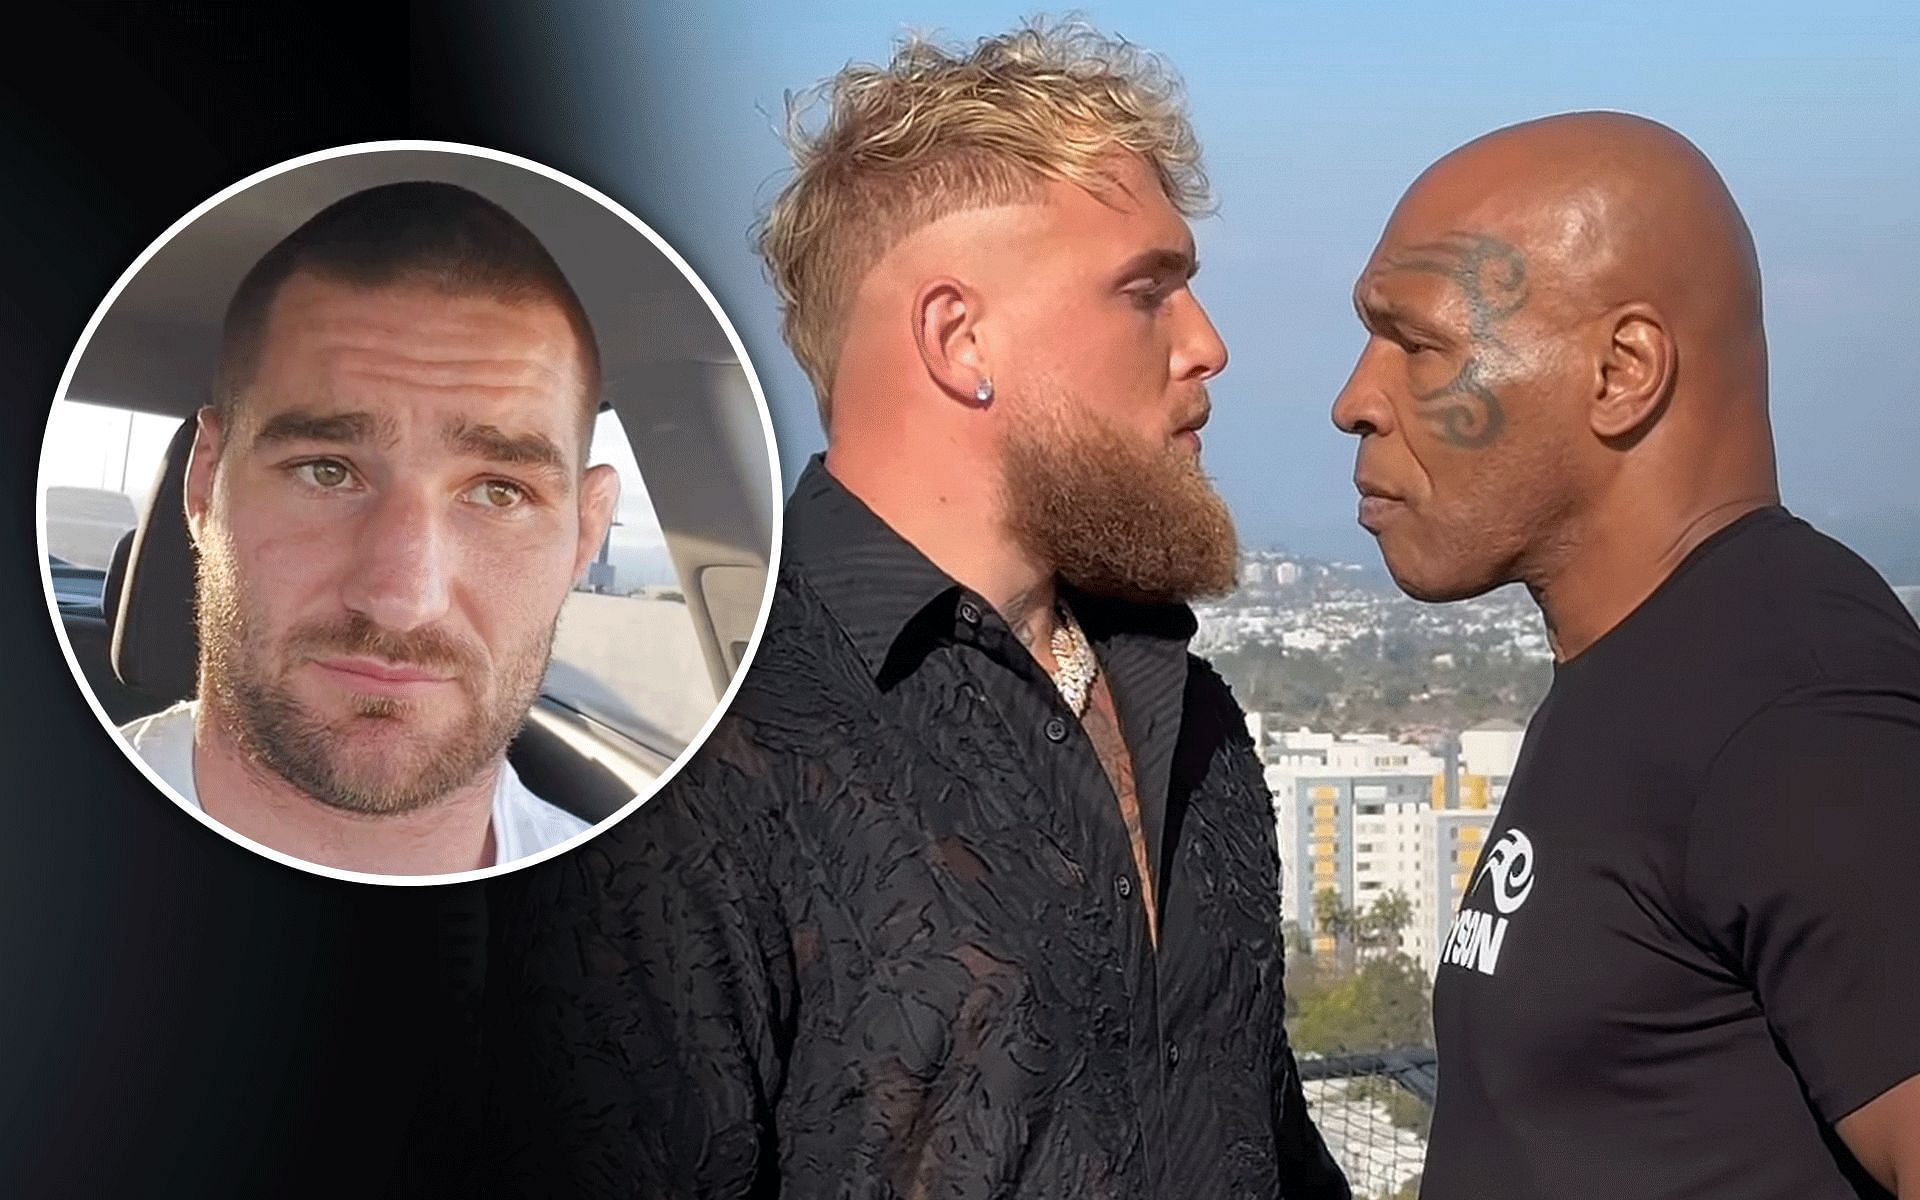 Sean Strickland (left) has strongly disapproved of Jake Paul (middle) boxing Mike Tyson (right) [Images courtesy: @stricklandmma and @jakepaul on Instagram]